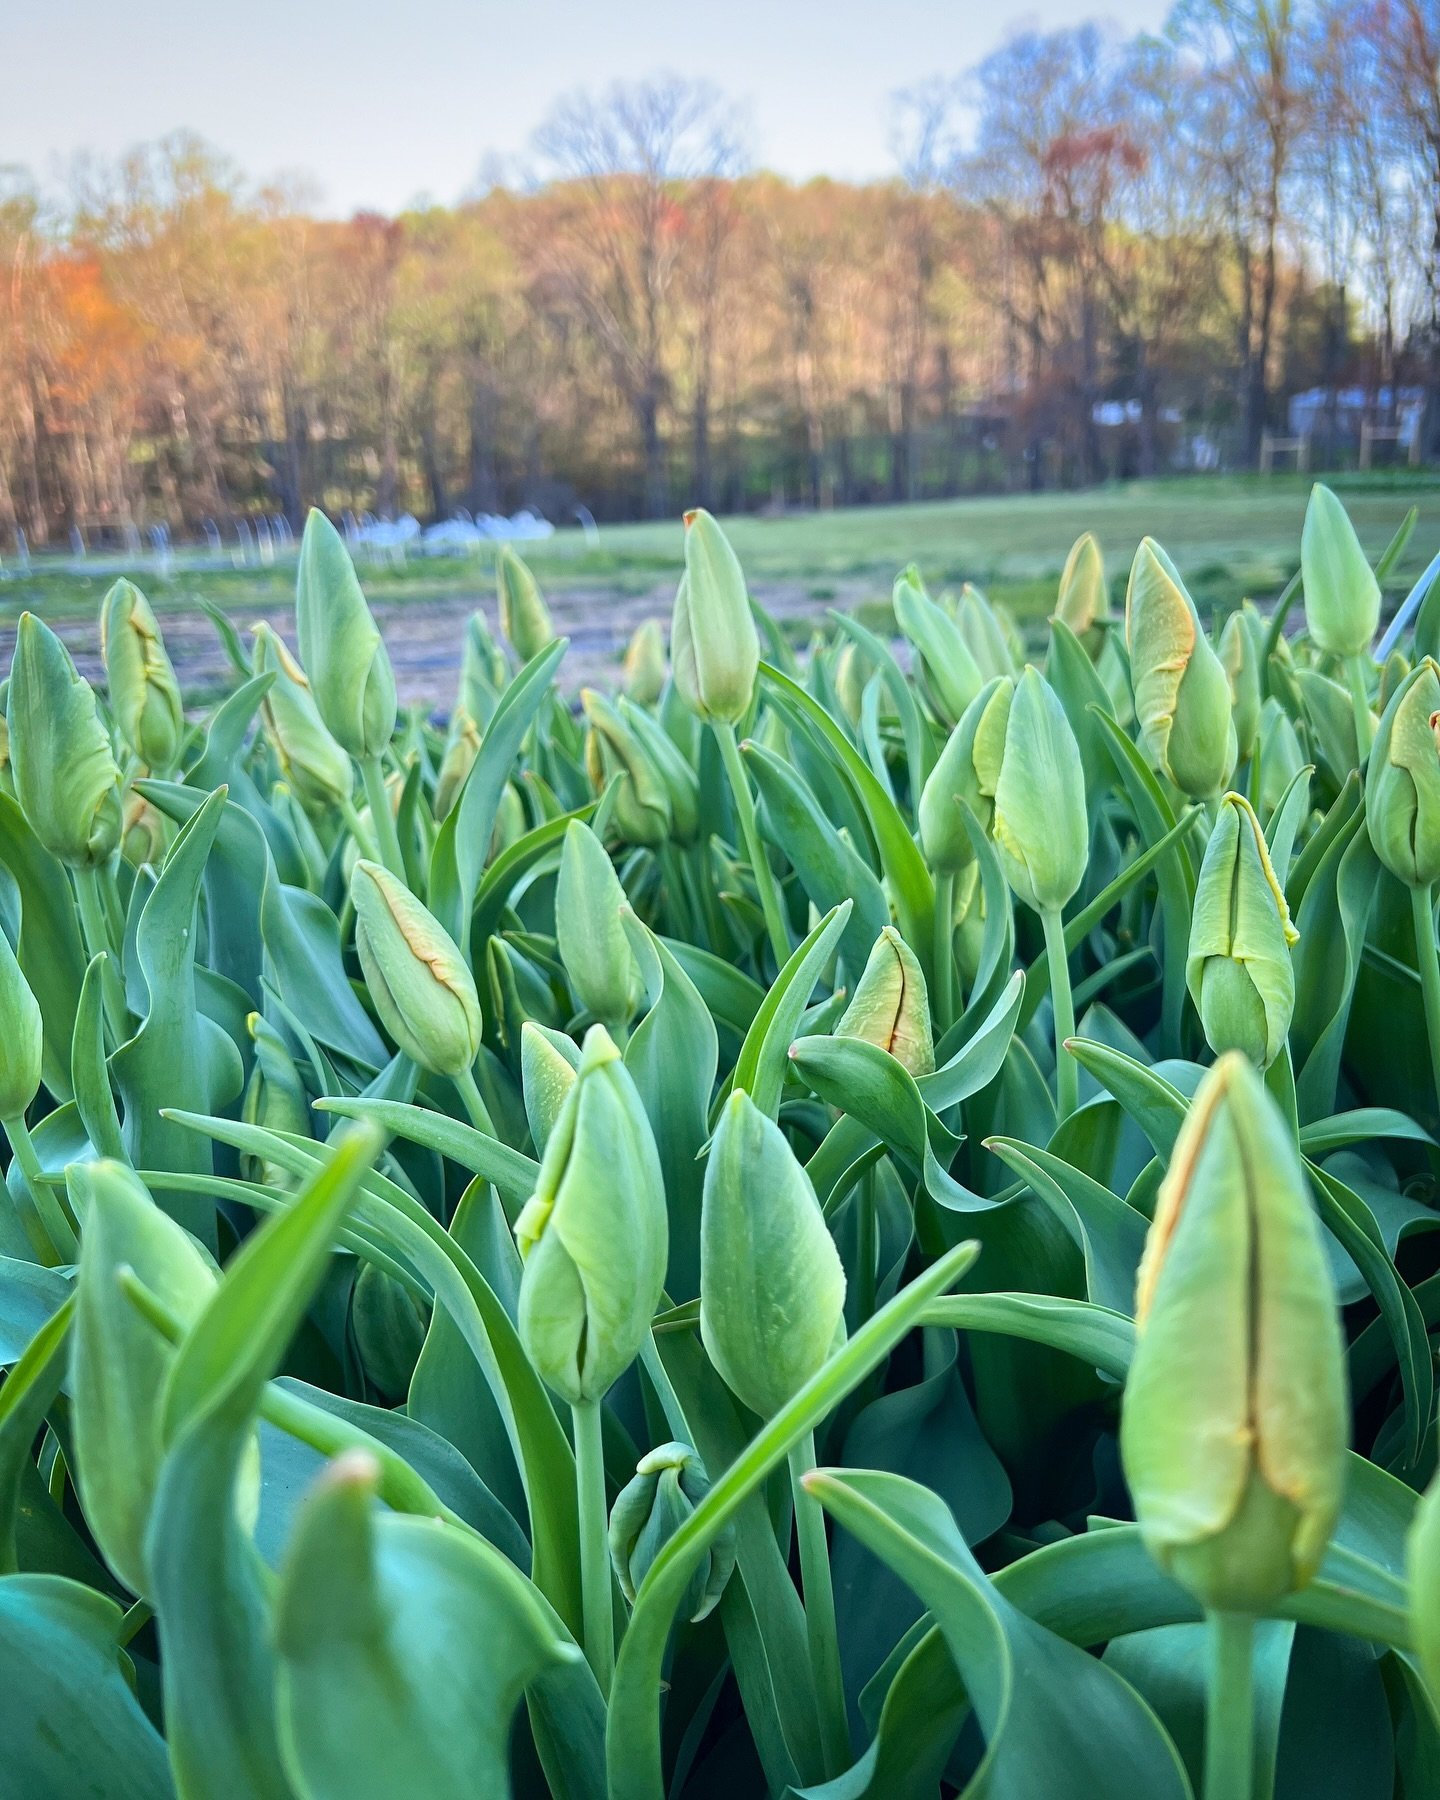 The last of the tulips, nearly ready to bloom. We love tulips, and these past four weeks have kept us busy! We will have our own mini tulip market this Saturday, April 20, when we have our first tuber pickup on the farm. 
.
.
.
#tulips #tulipseason #